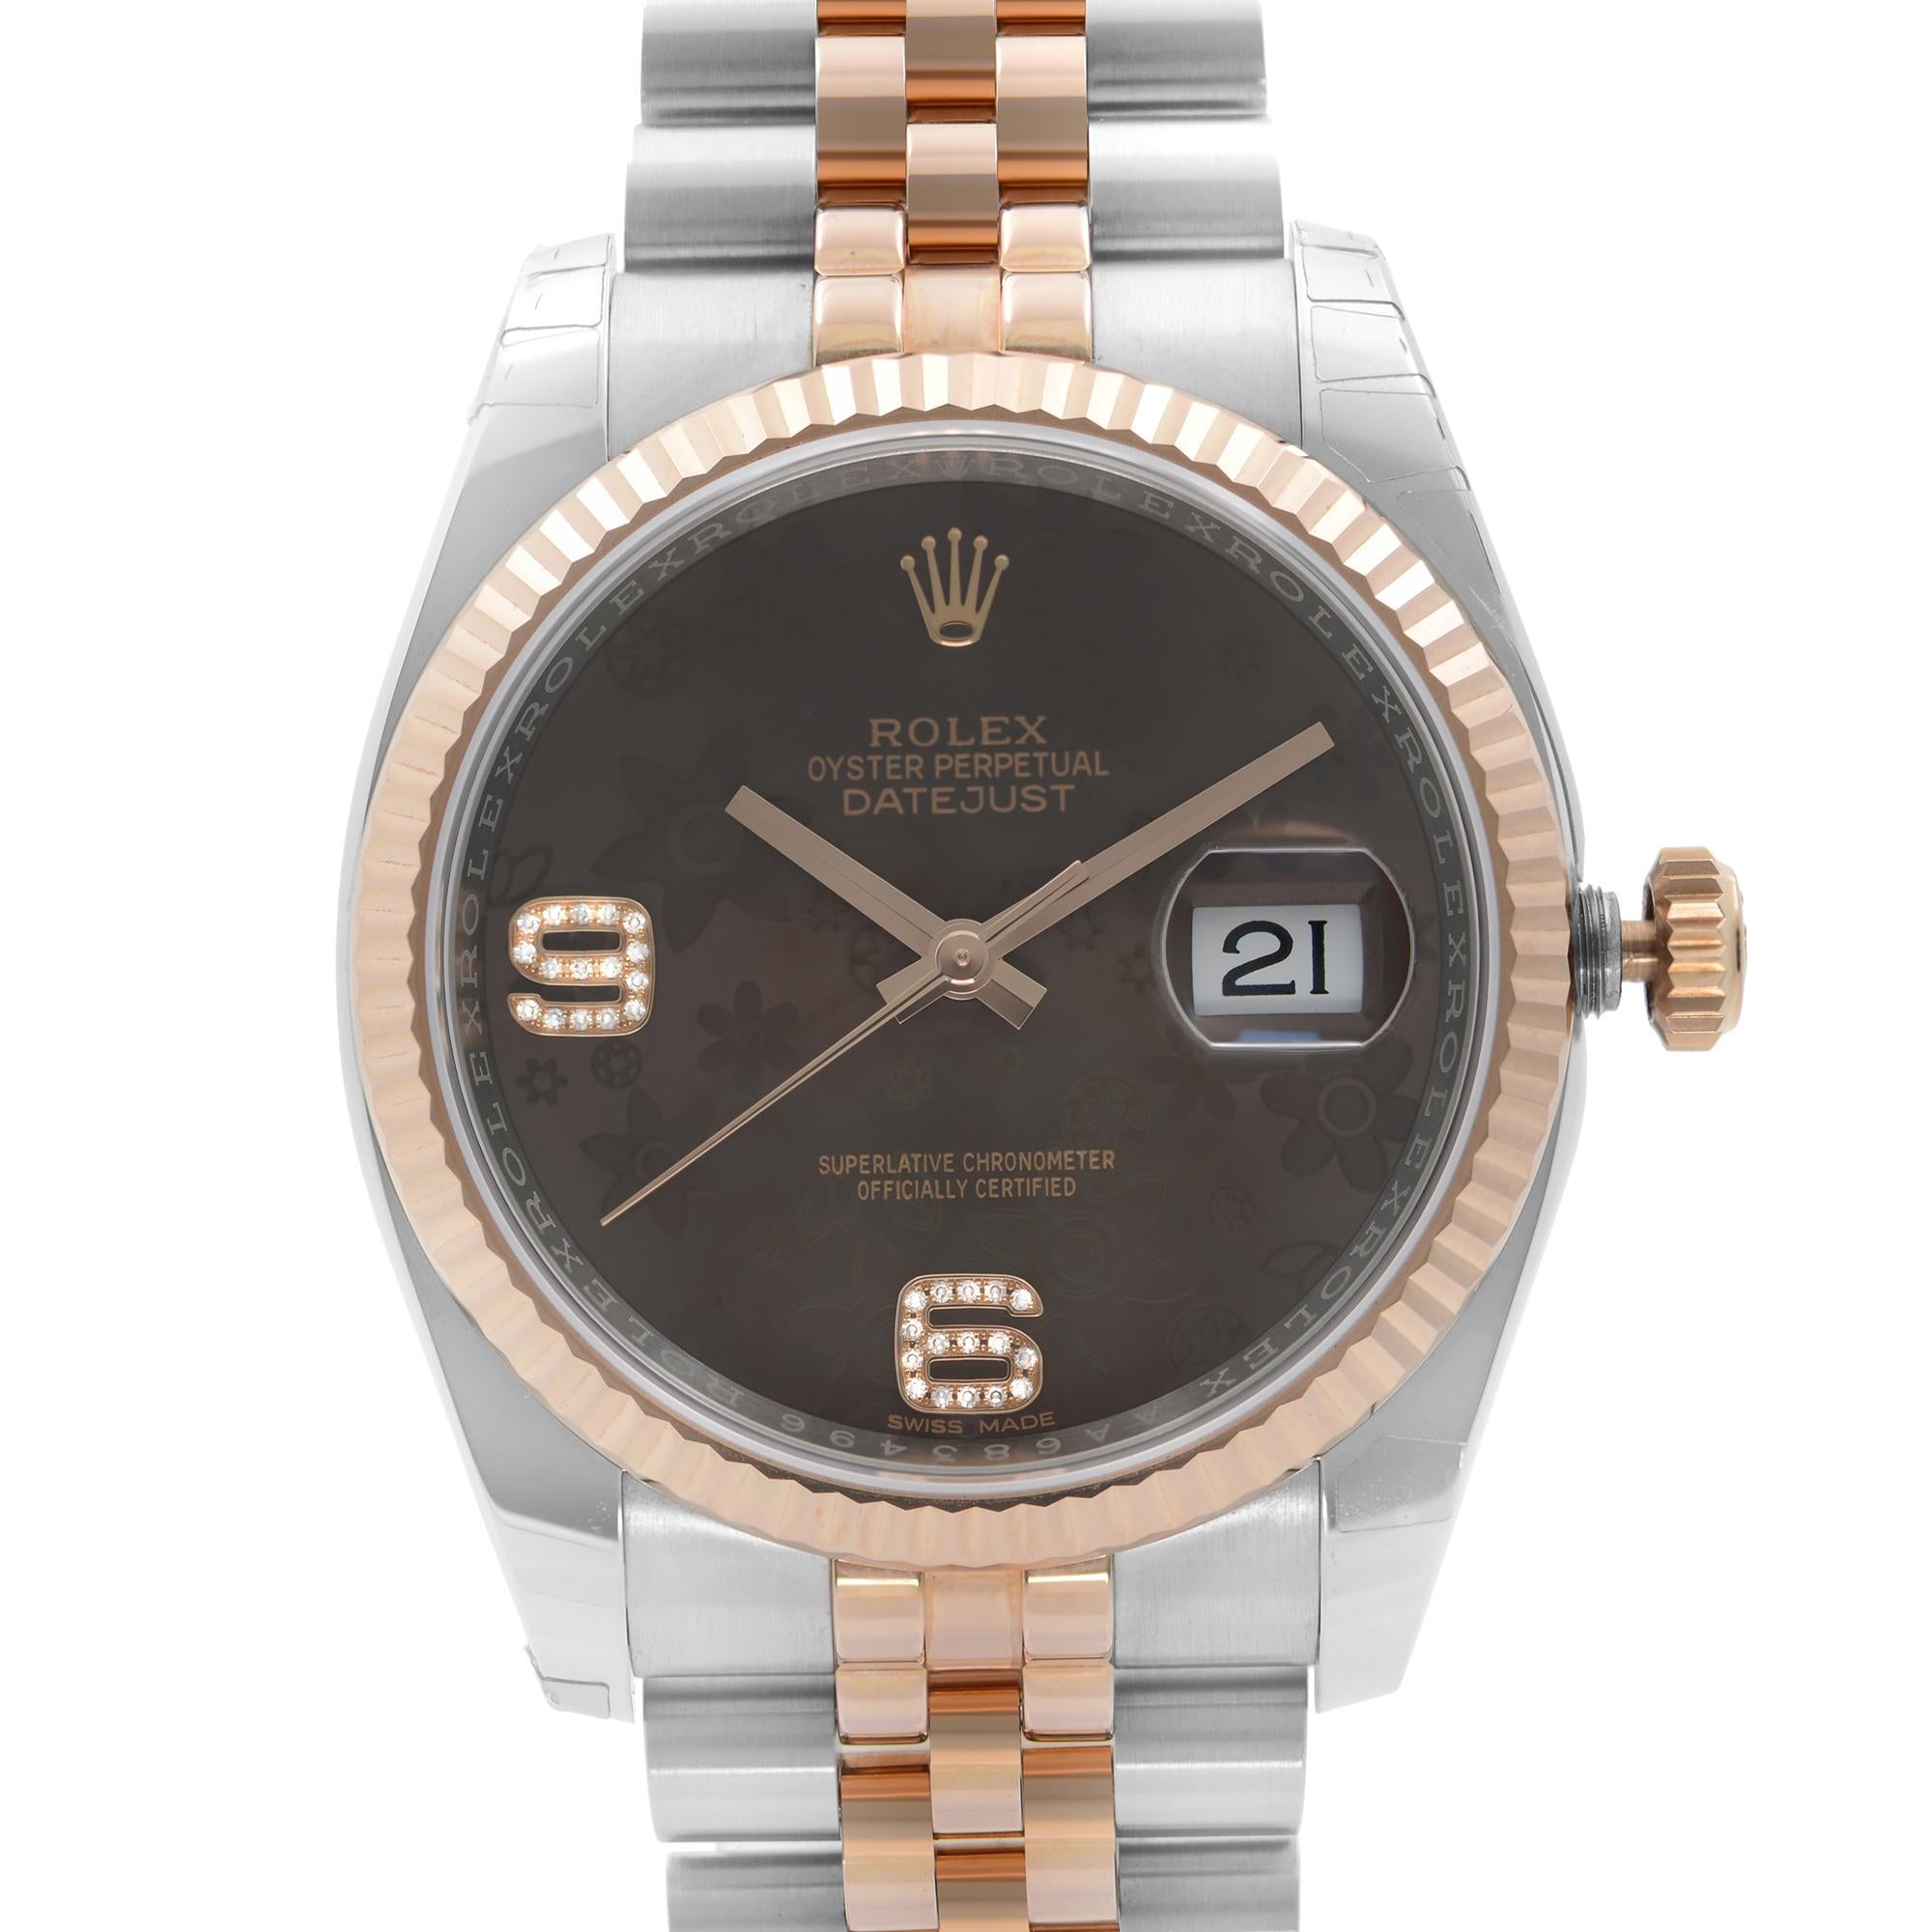 Store Display Model Partially Stickered Case. Rolex Oyster Perpetual Datejust Stainless Steel and 18kt Everose Gold Chocolate Floral Motif Dial Automatic Ladies Watch 116231CHFDAJ. This Beautiful Timepiece Features: Stainless Steel Case with a